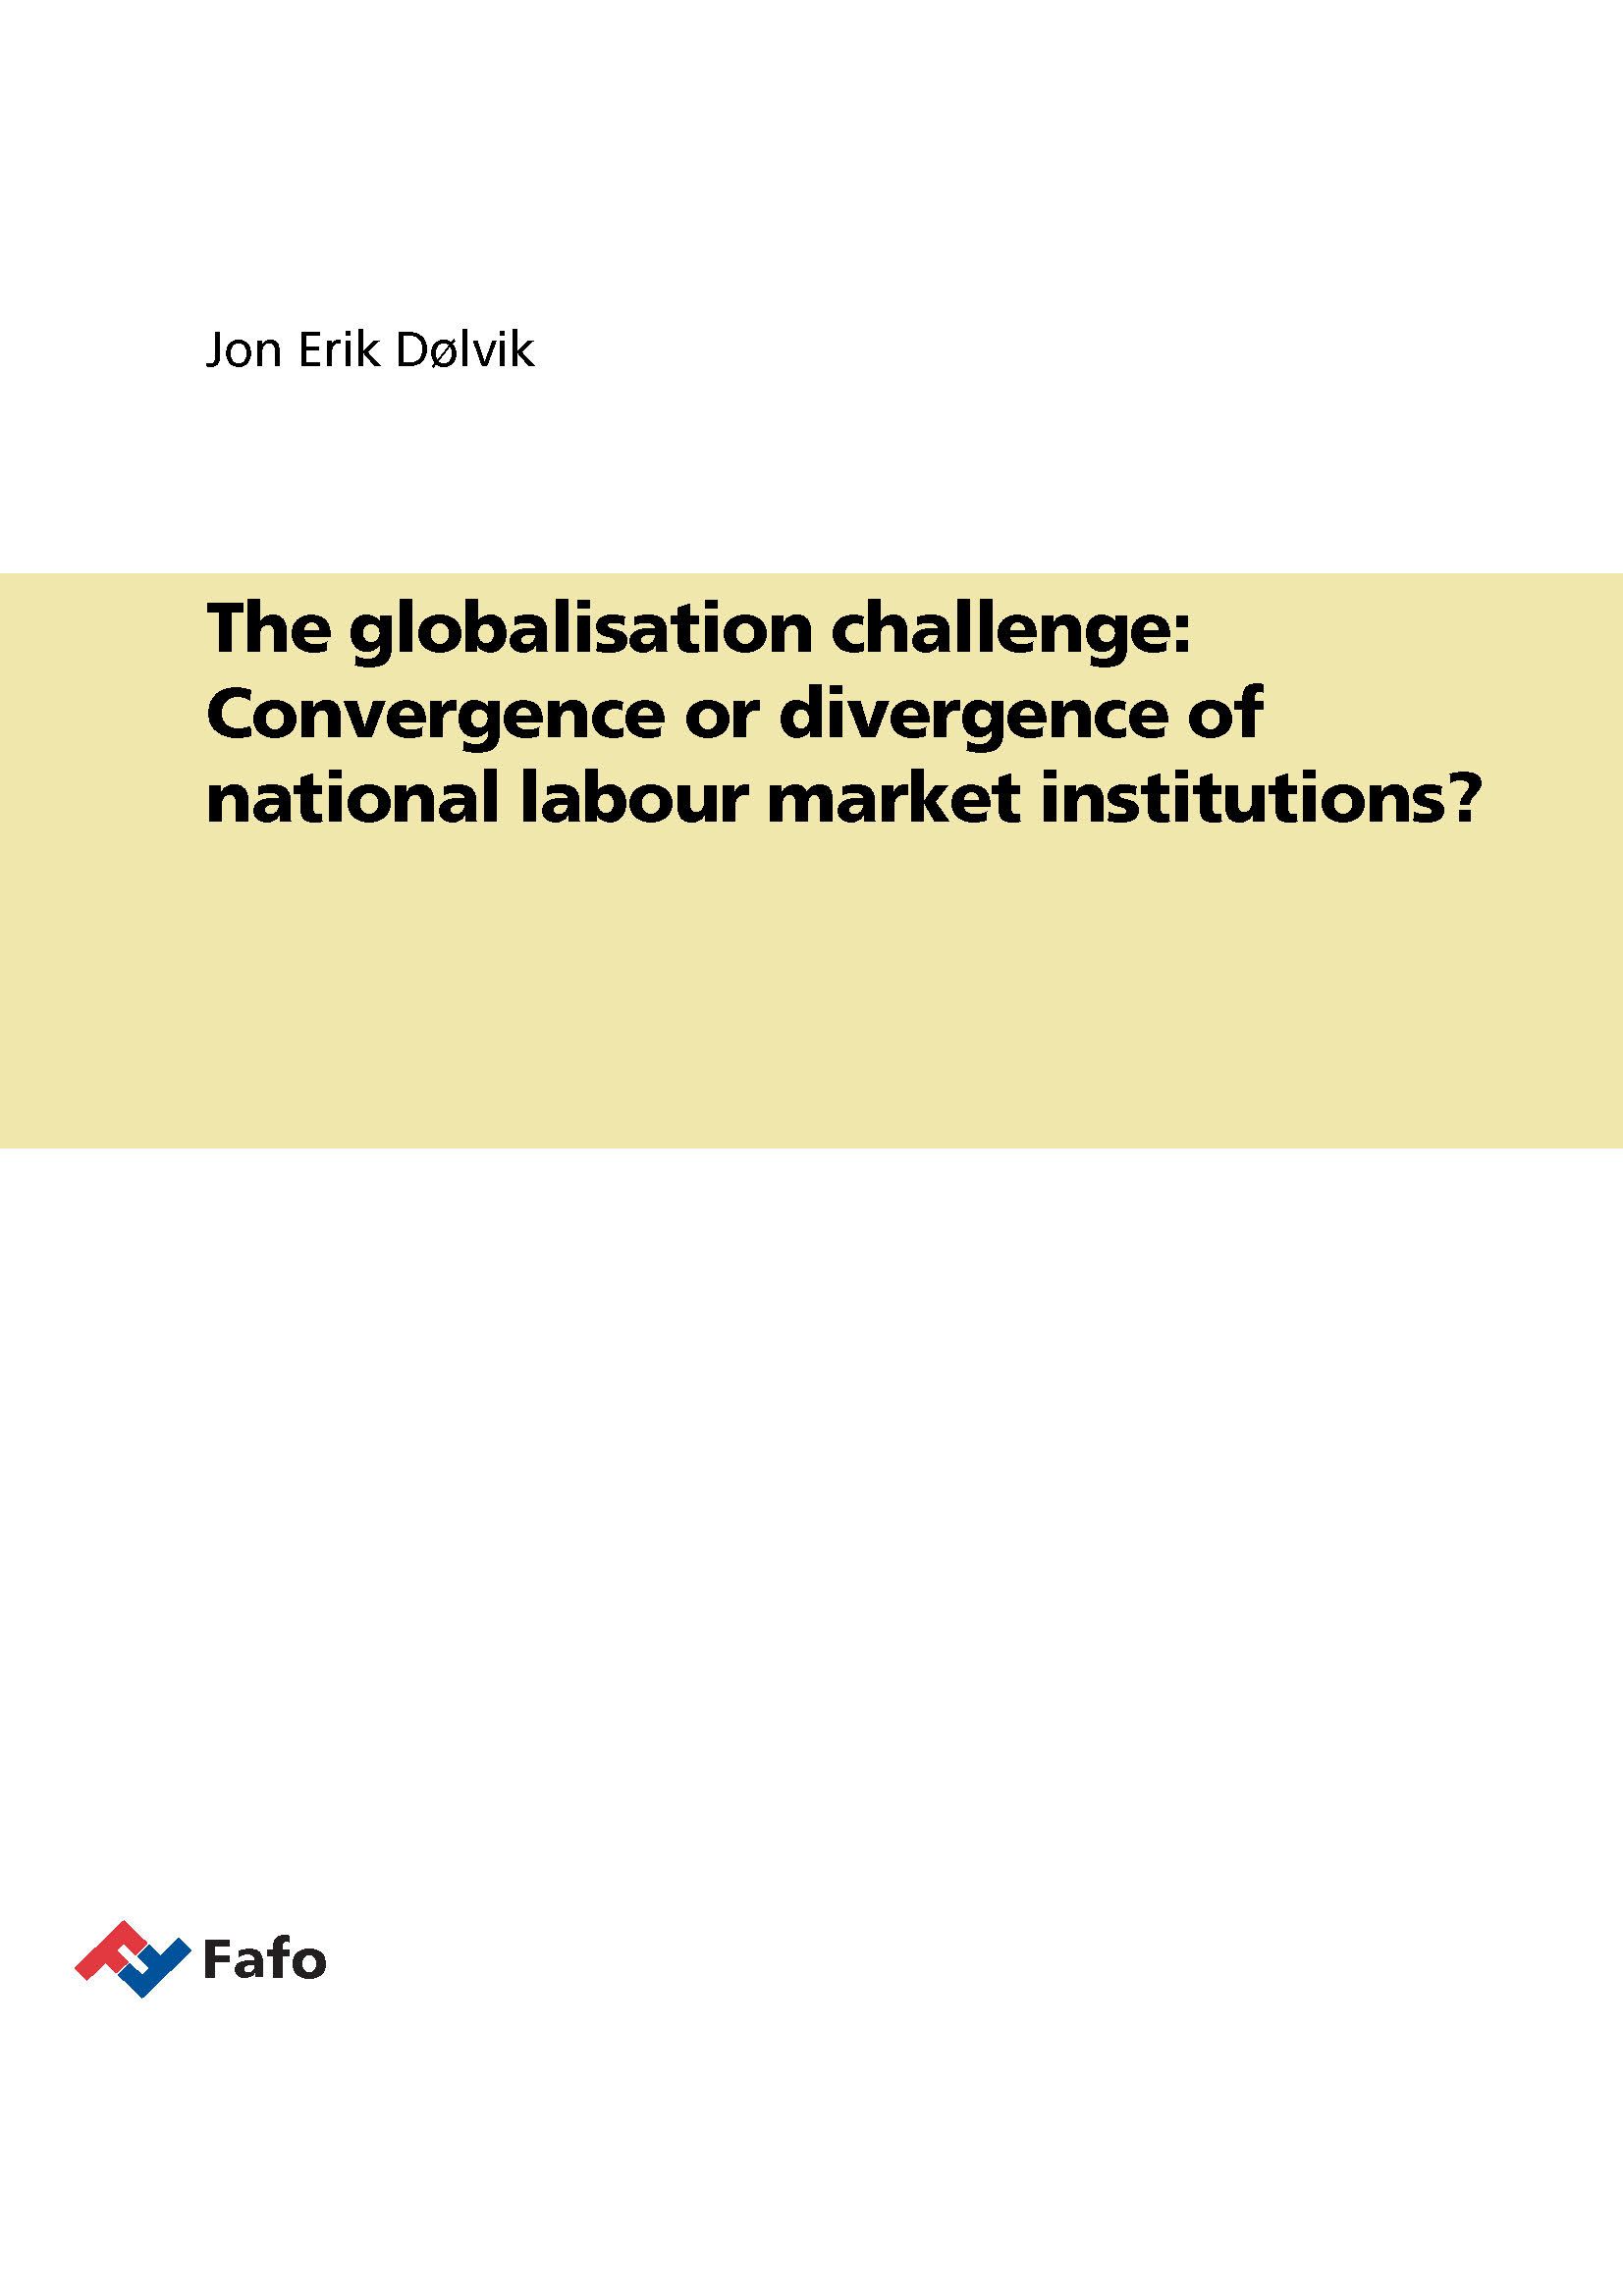 The globalisation challenge: Convergence or divergence of national labour market institutions?